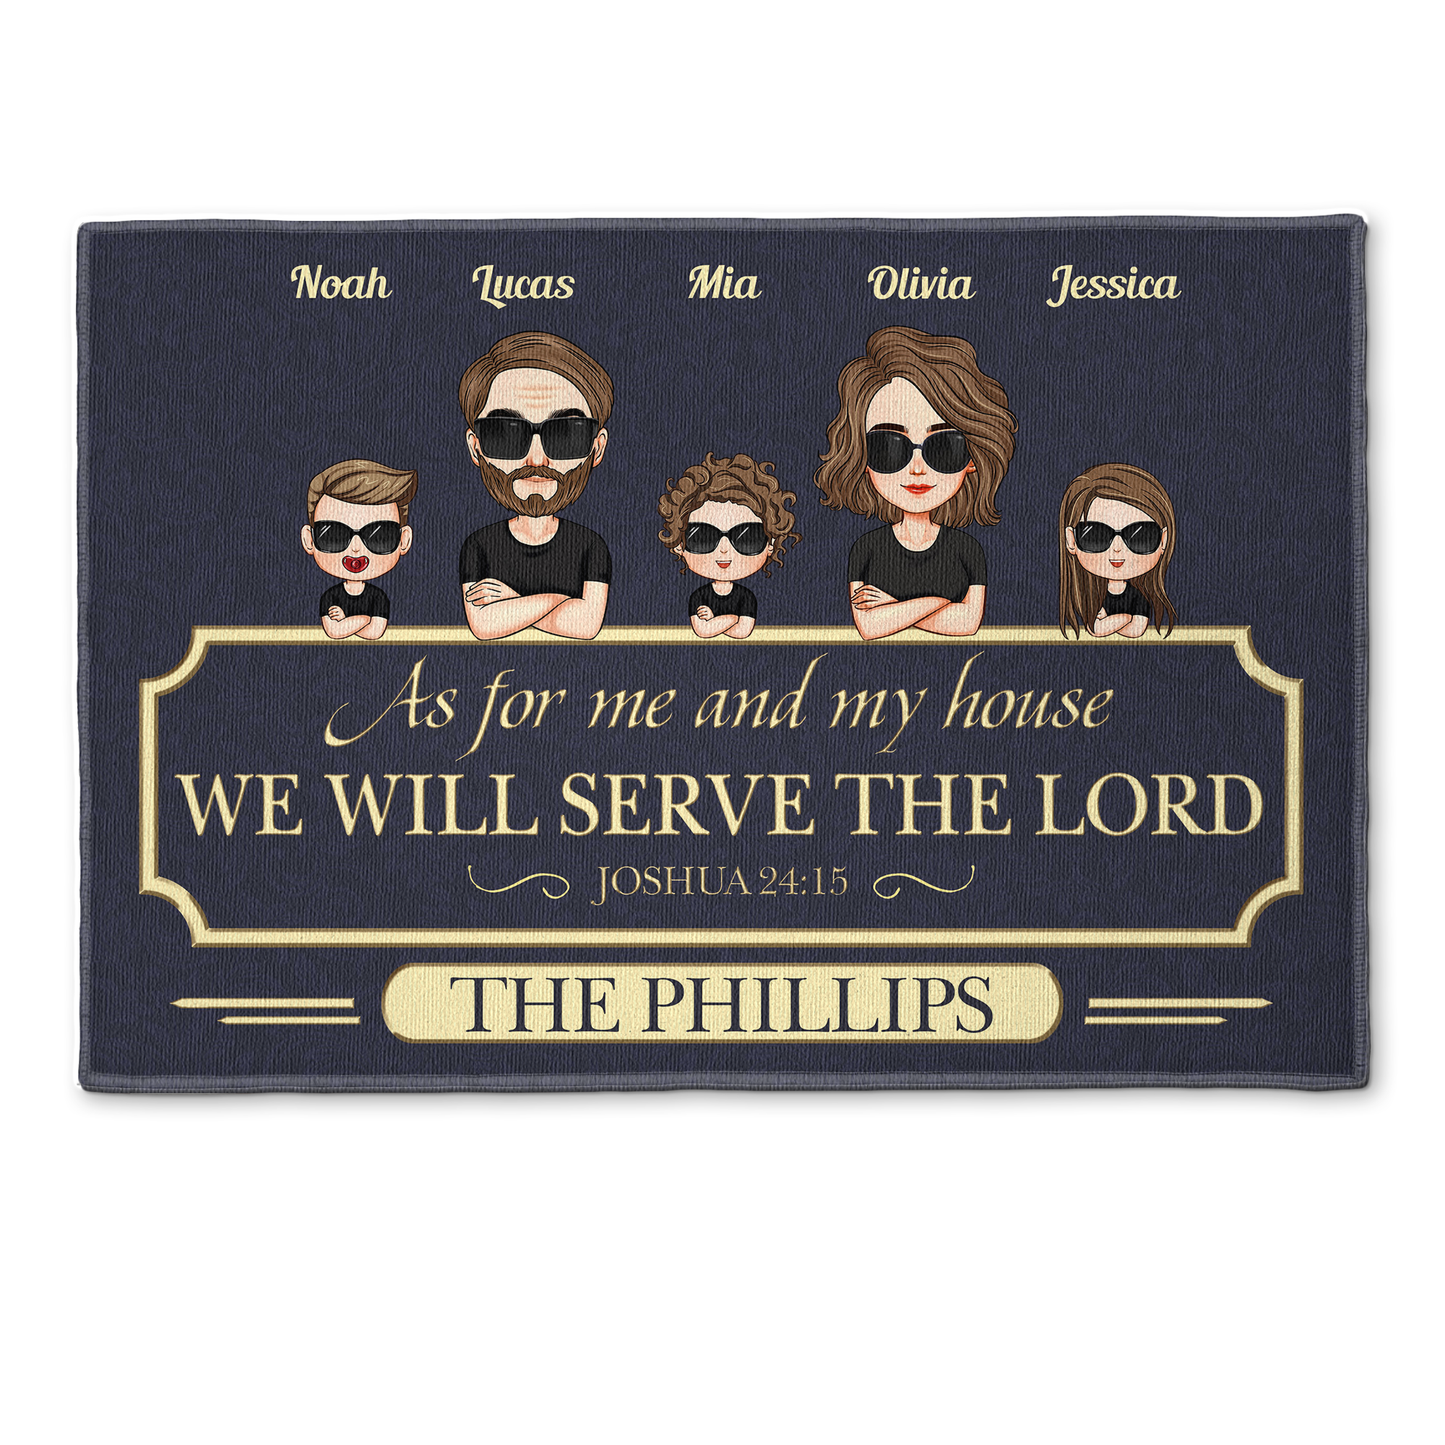 We Will Serve The Lord - Personalized Doormat - Home Decor, Birthday, Loving Gift For Christians